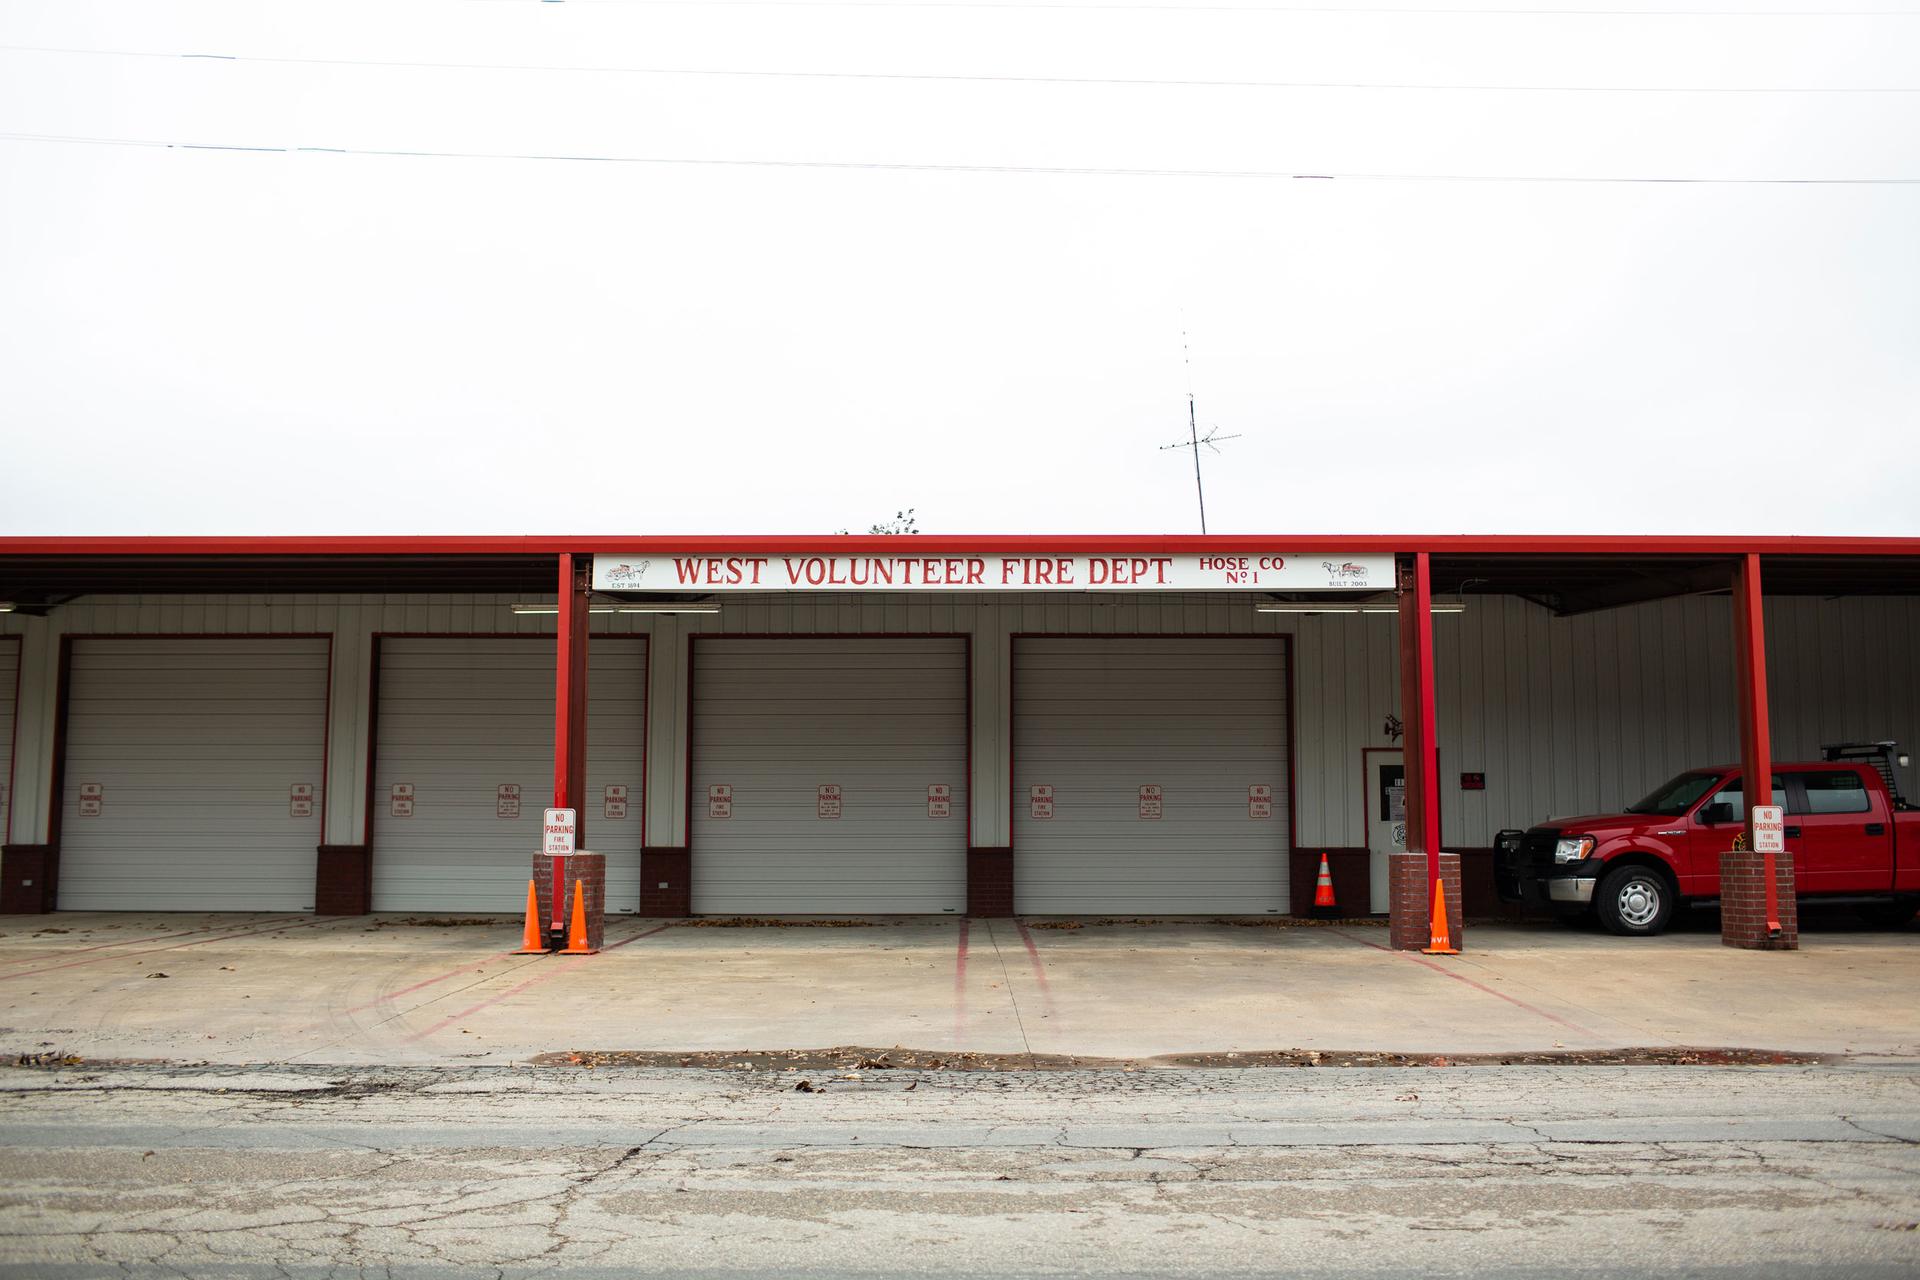 A four bay garage is shown with a red truck on one side.